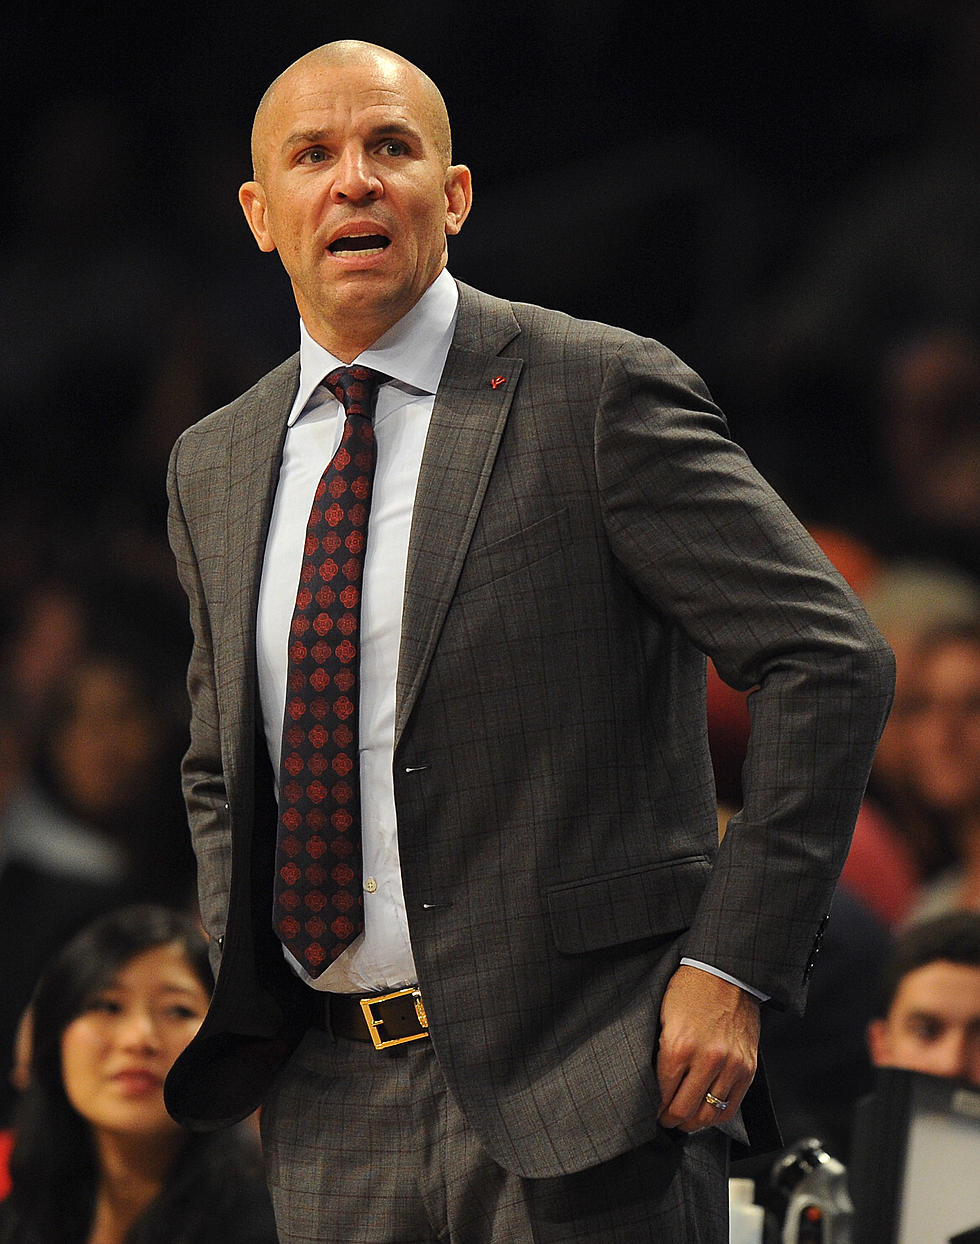 Sodagate – Did Jason Kidd Intentionally Spill His Drink To Get An Extra Timeout?